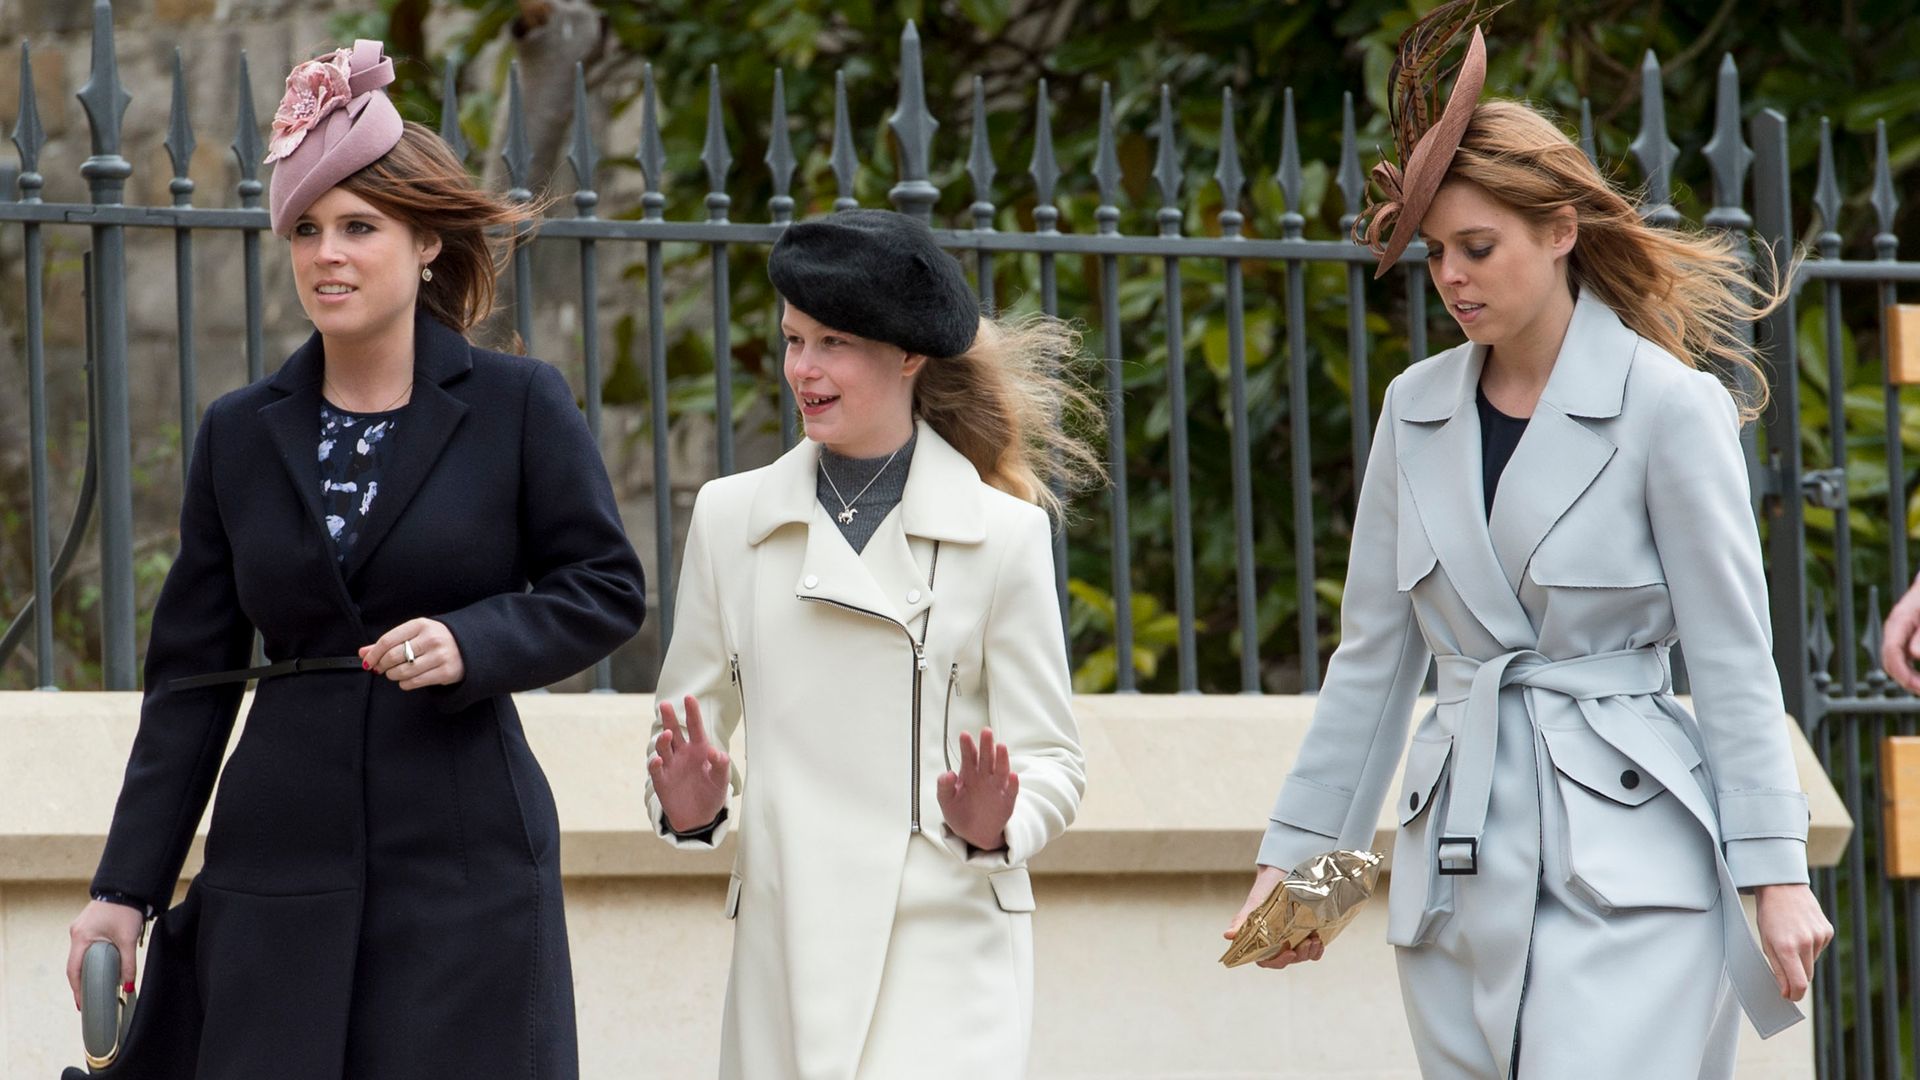 Princess Eugenie and Princess Beatrice with Lady Louise Windsor as they attend the Easter Sunday Service at St George's Chapel in 2016 